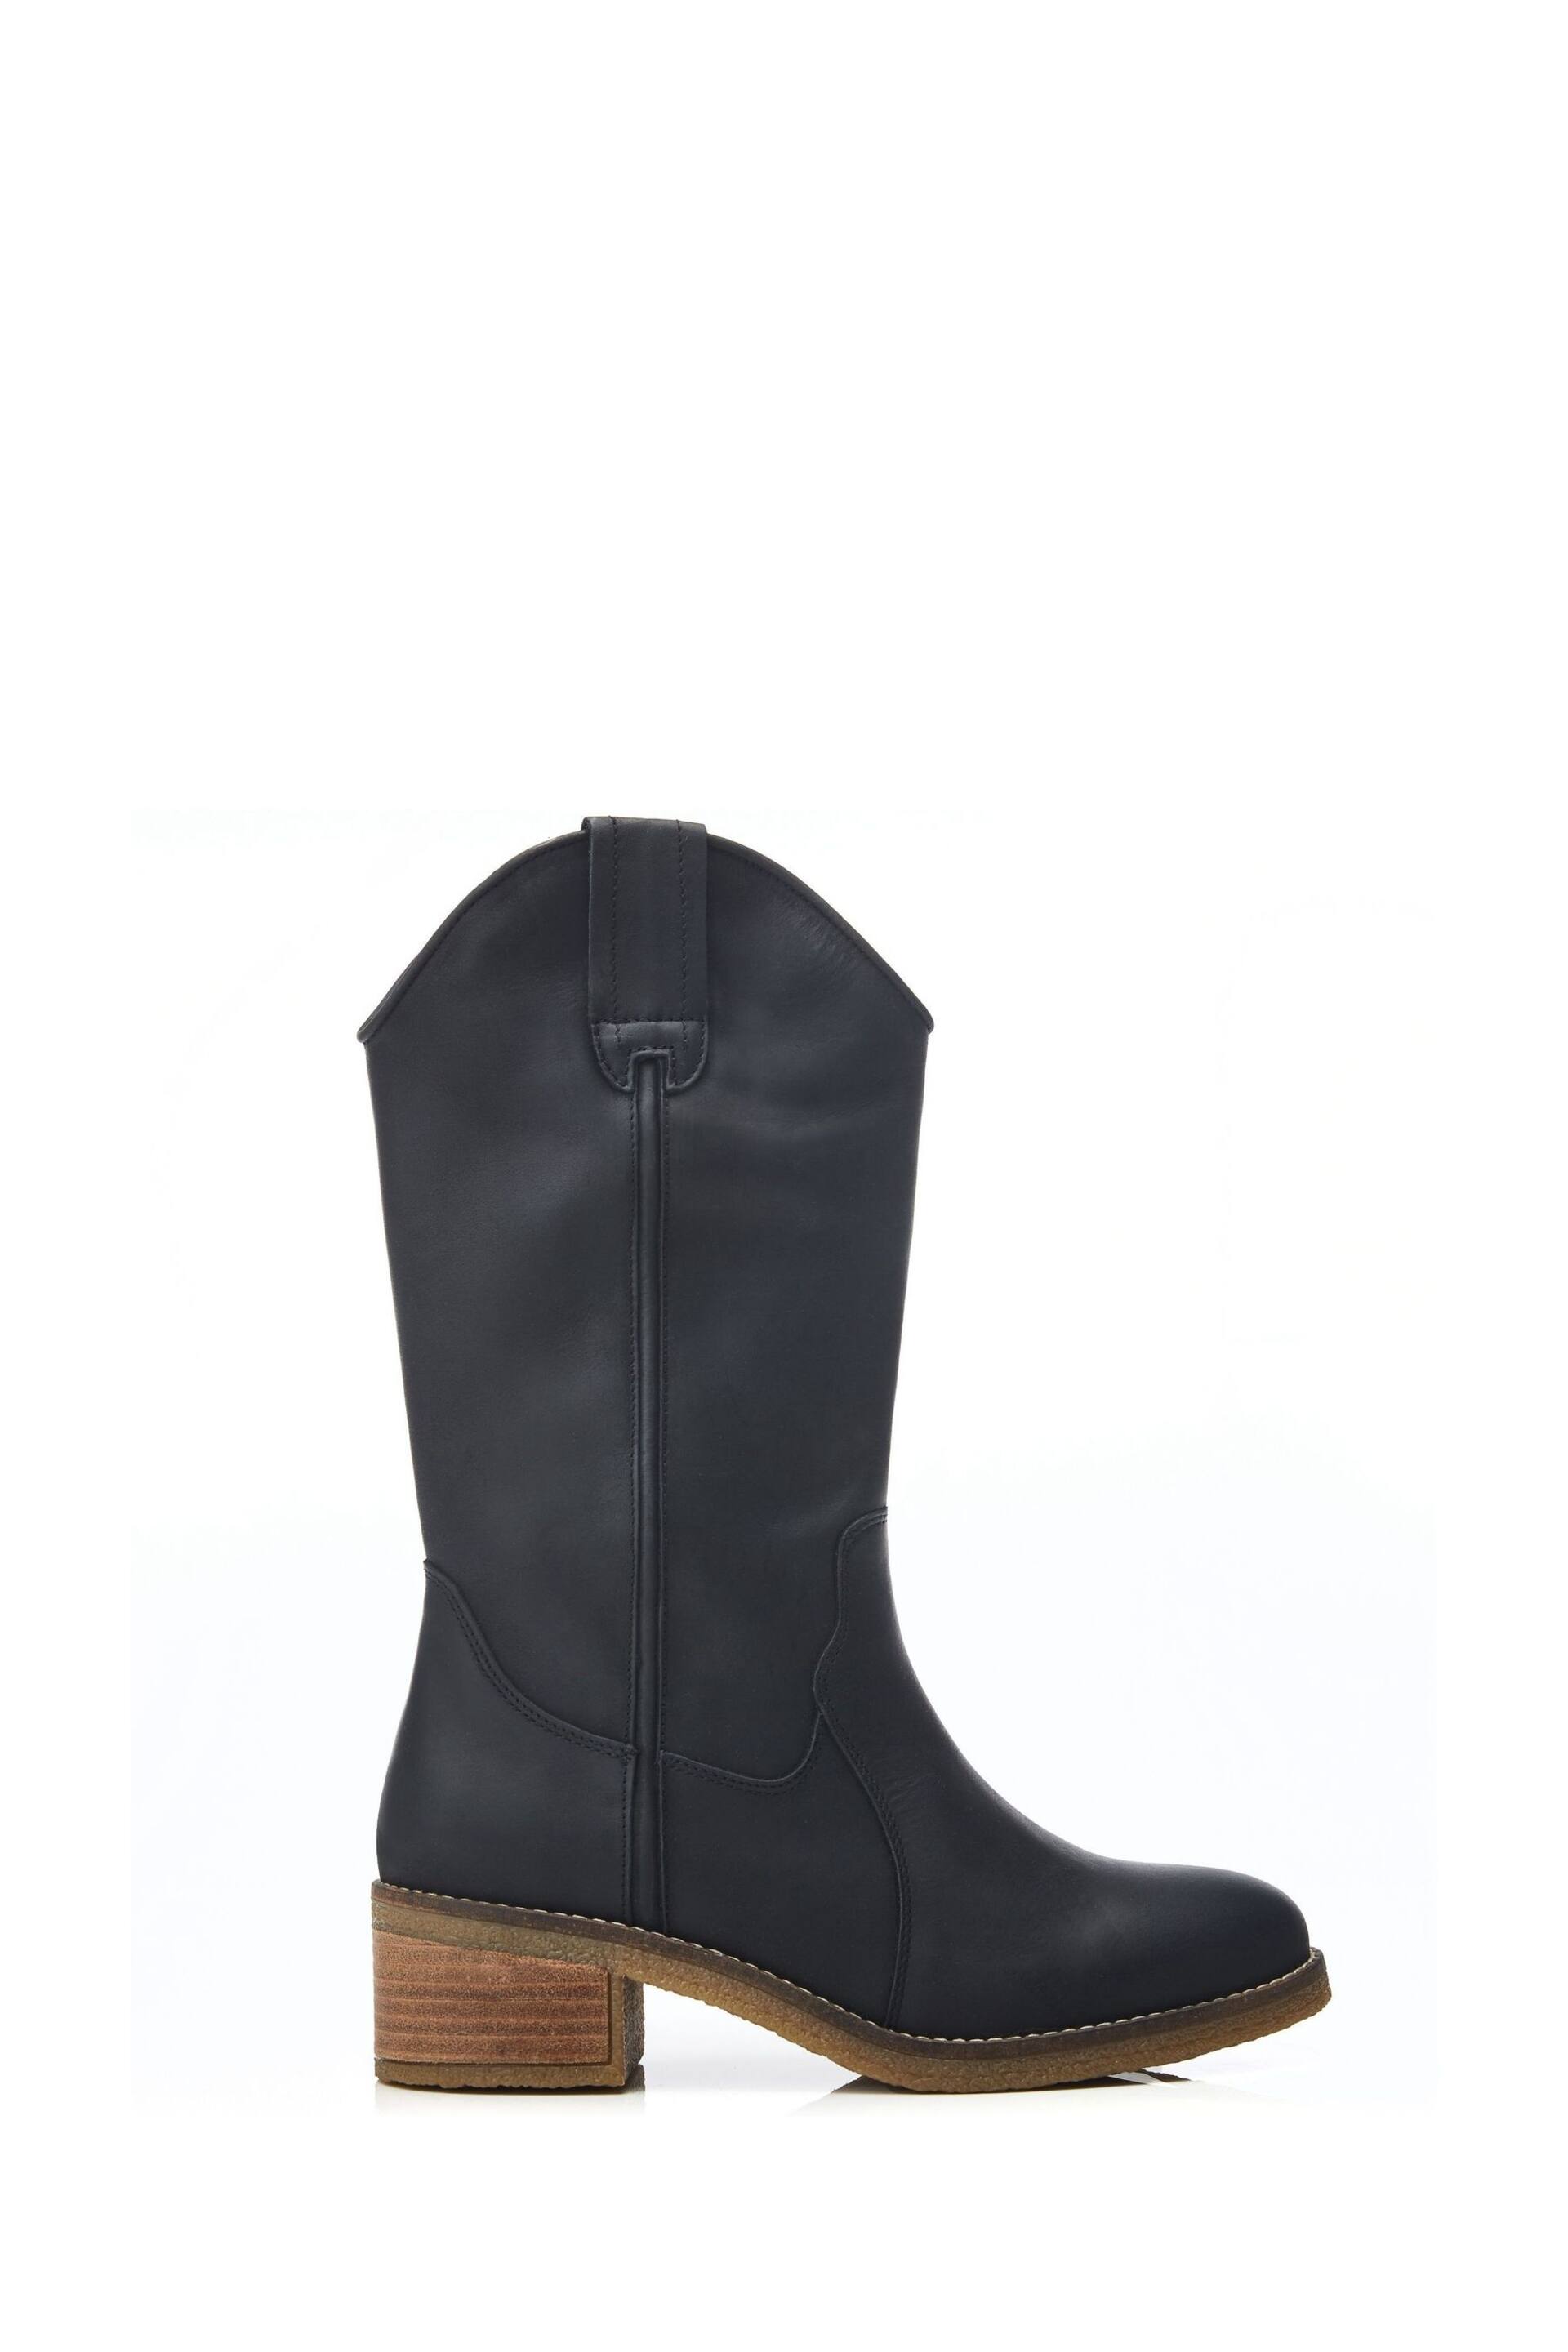 Moda in Pelle Dana Crepe Sole Long Western Natural Boots - Image 1 of 4